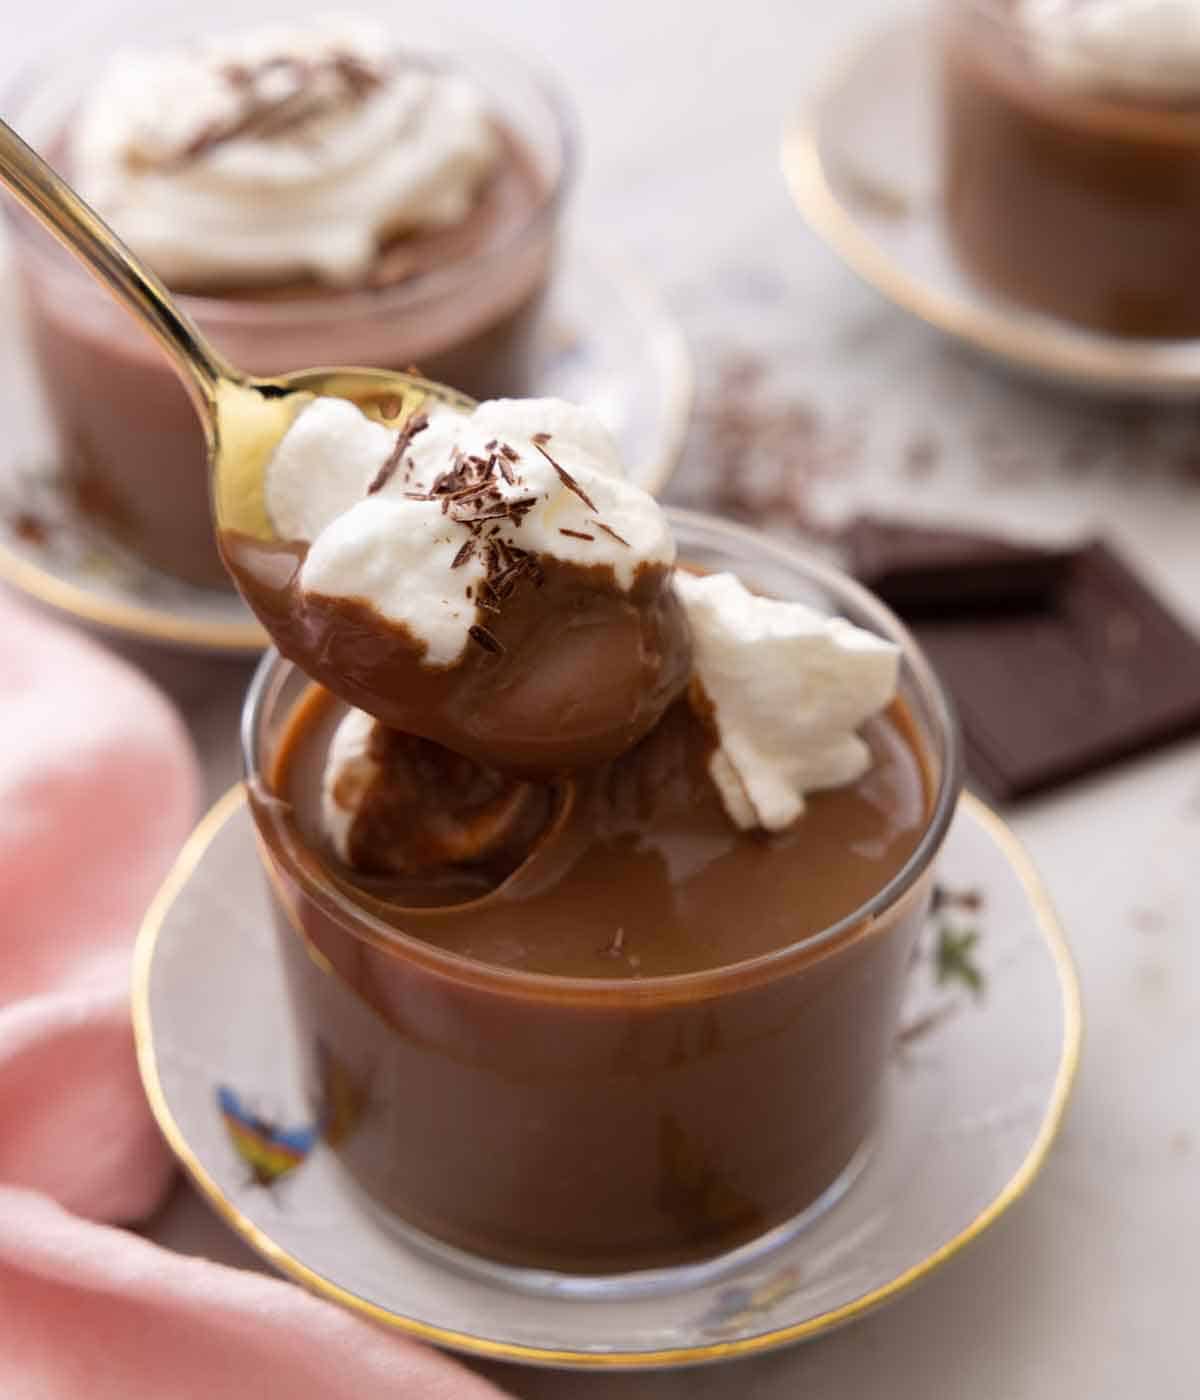 A spoonful of chocolate pudding with whipped cream being lifted out of the glass.